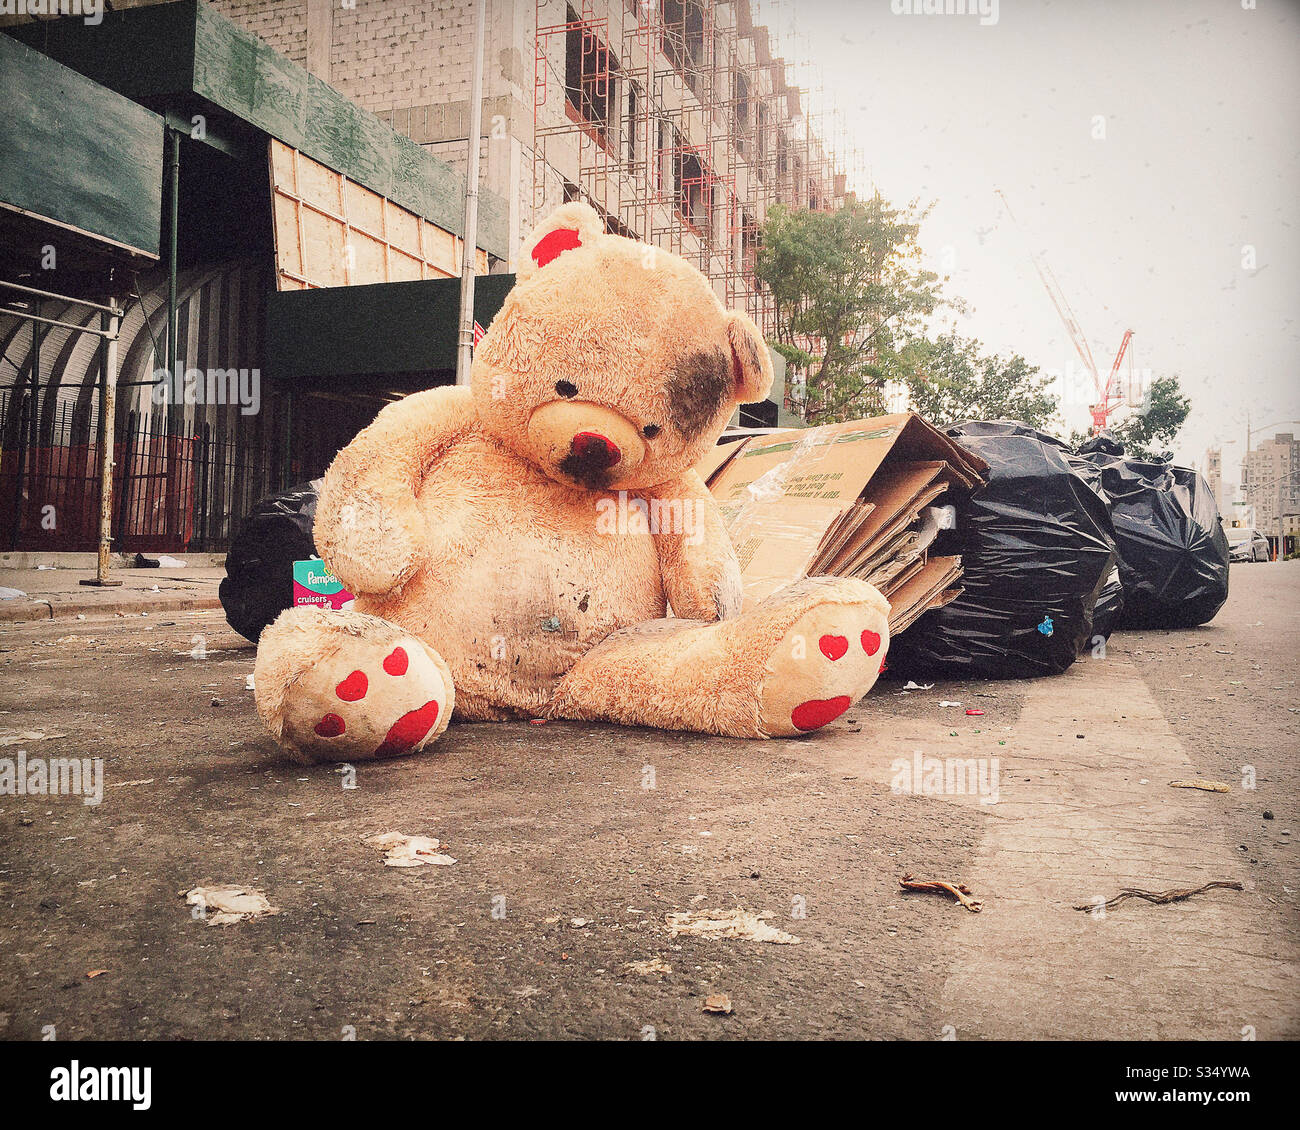 Large Dirty Teddy Bear Left in the Trash Stock Photo